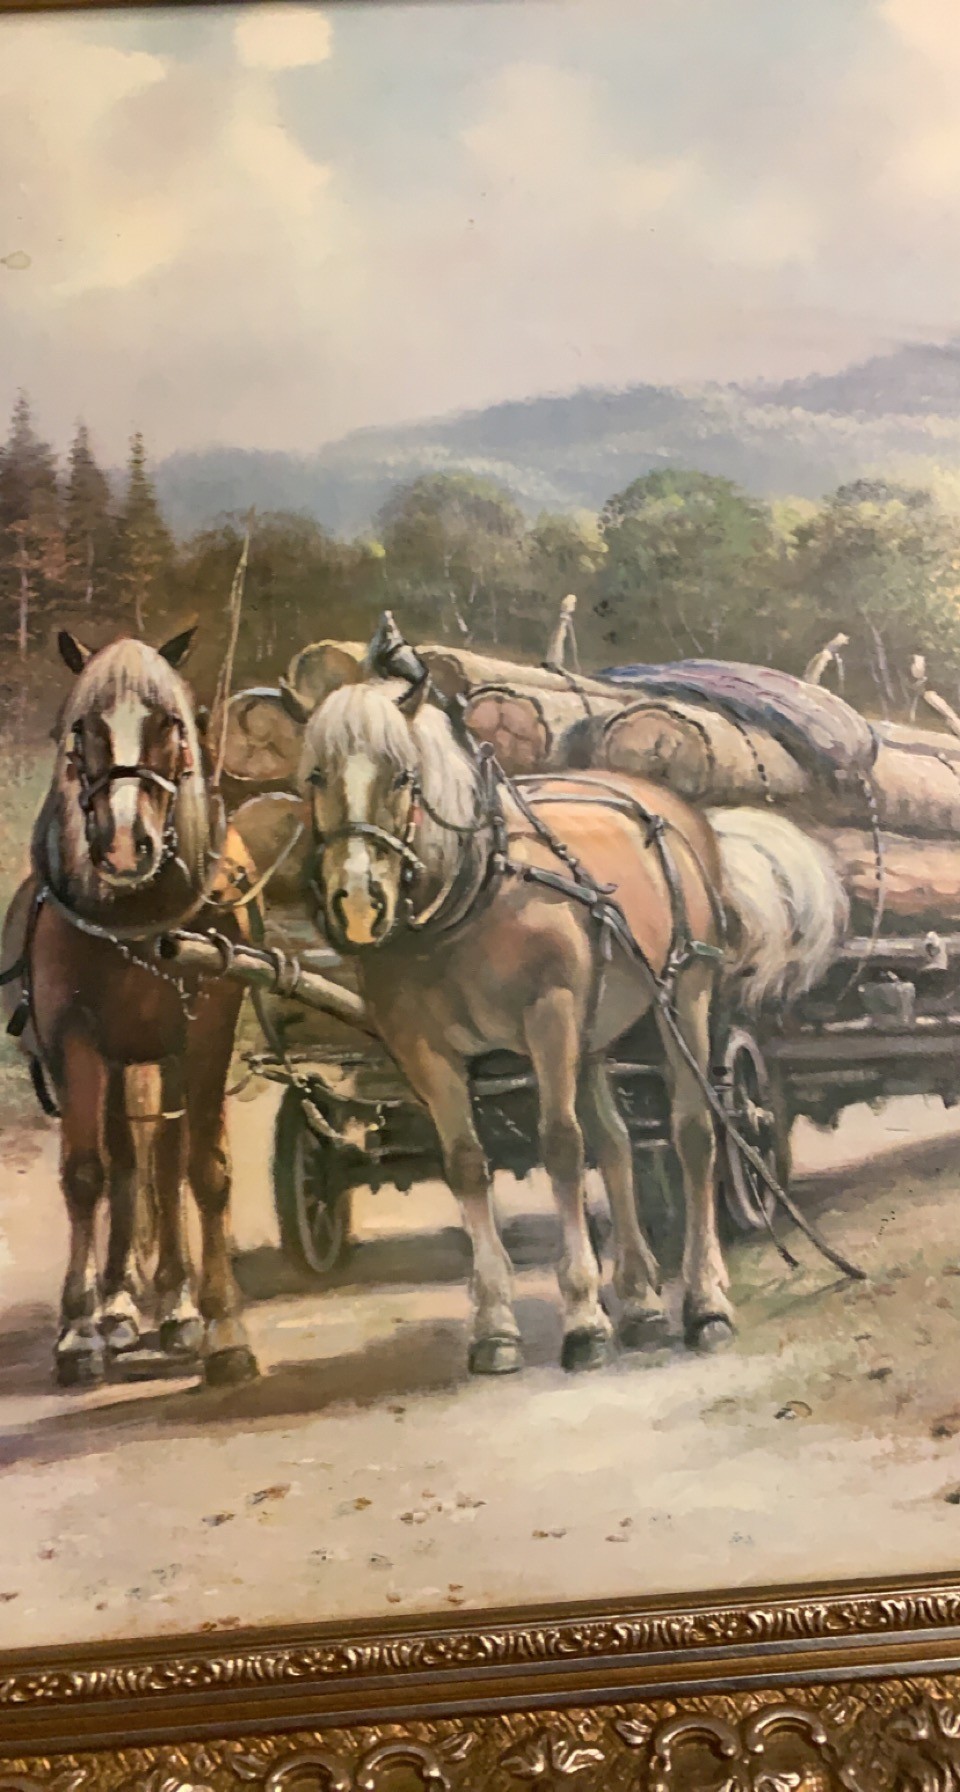 Framed print of working horses - Image 2 of 3